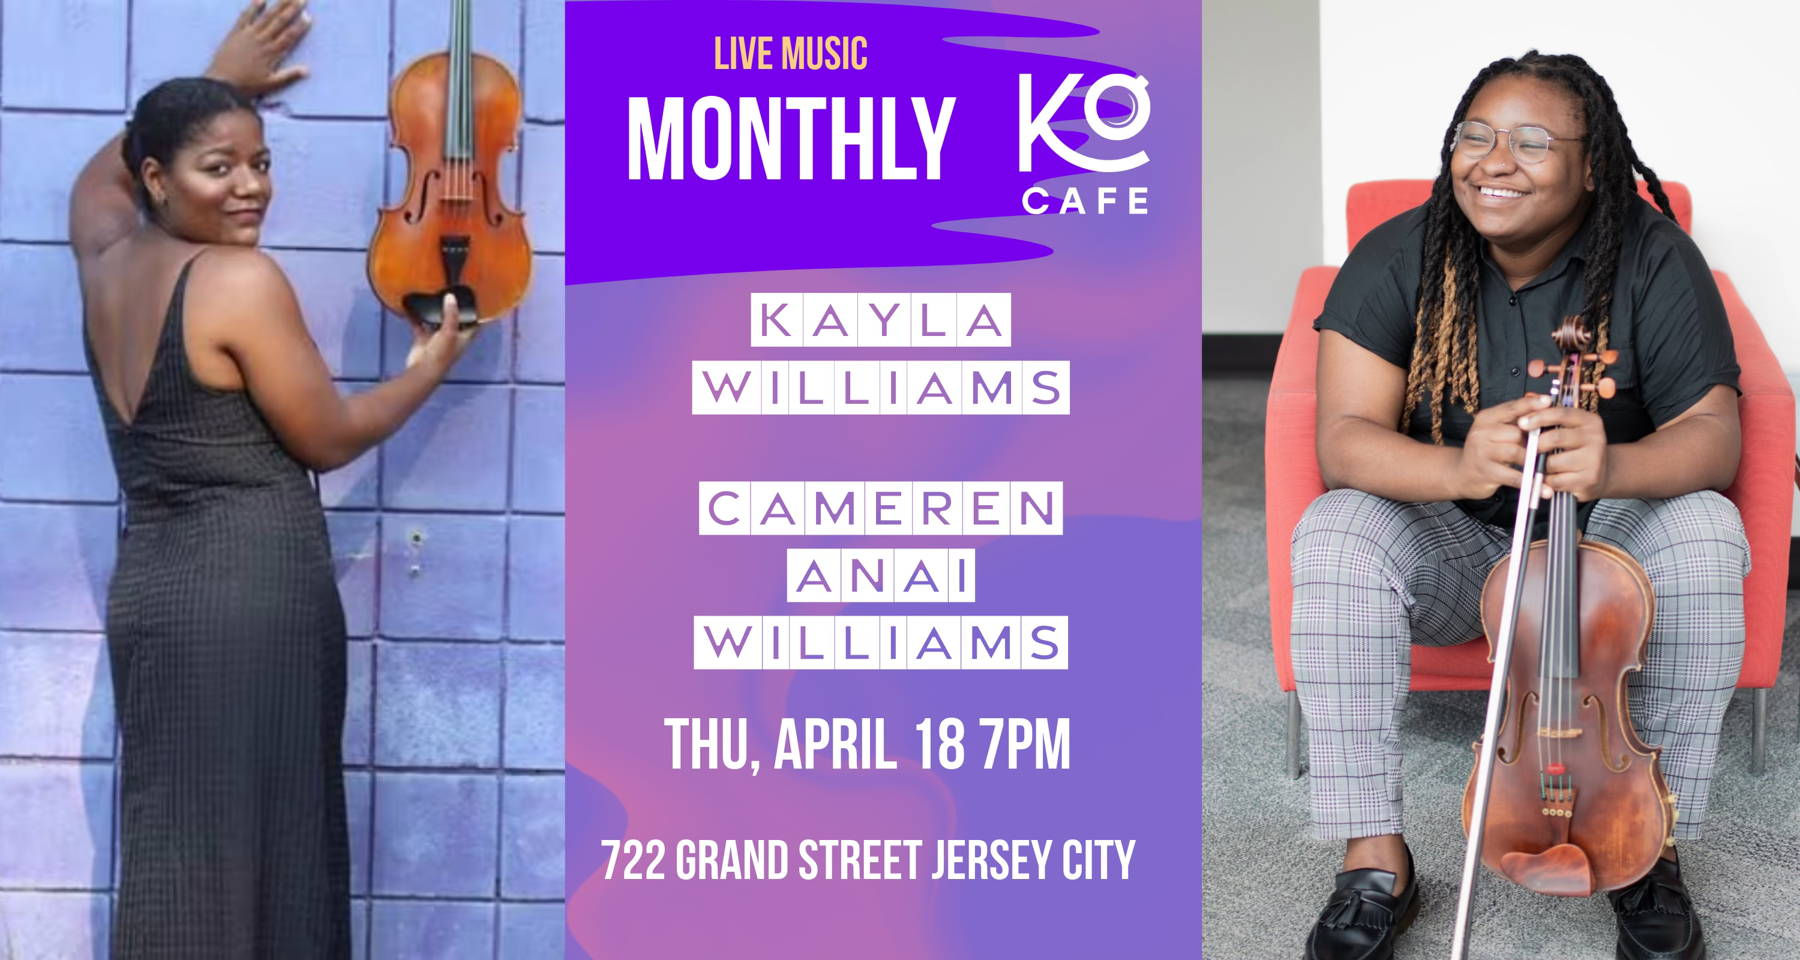 Kayla Williams at Kọ Cafe - Live Music Monthly